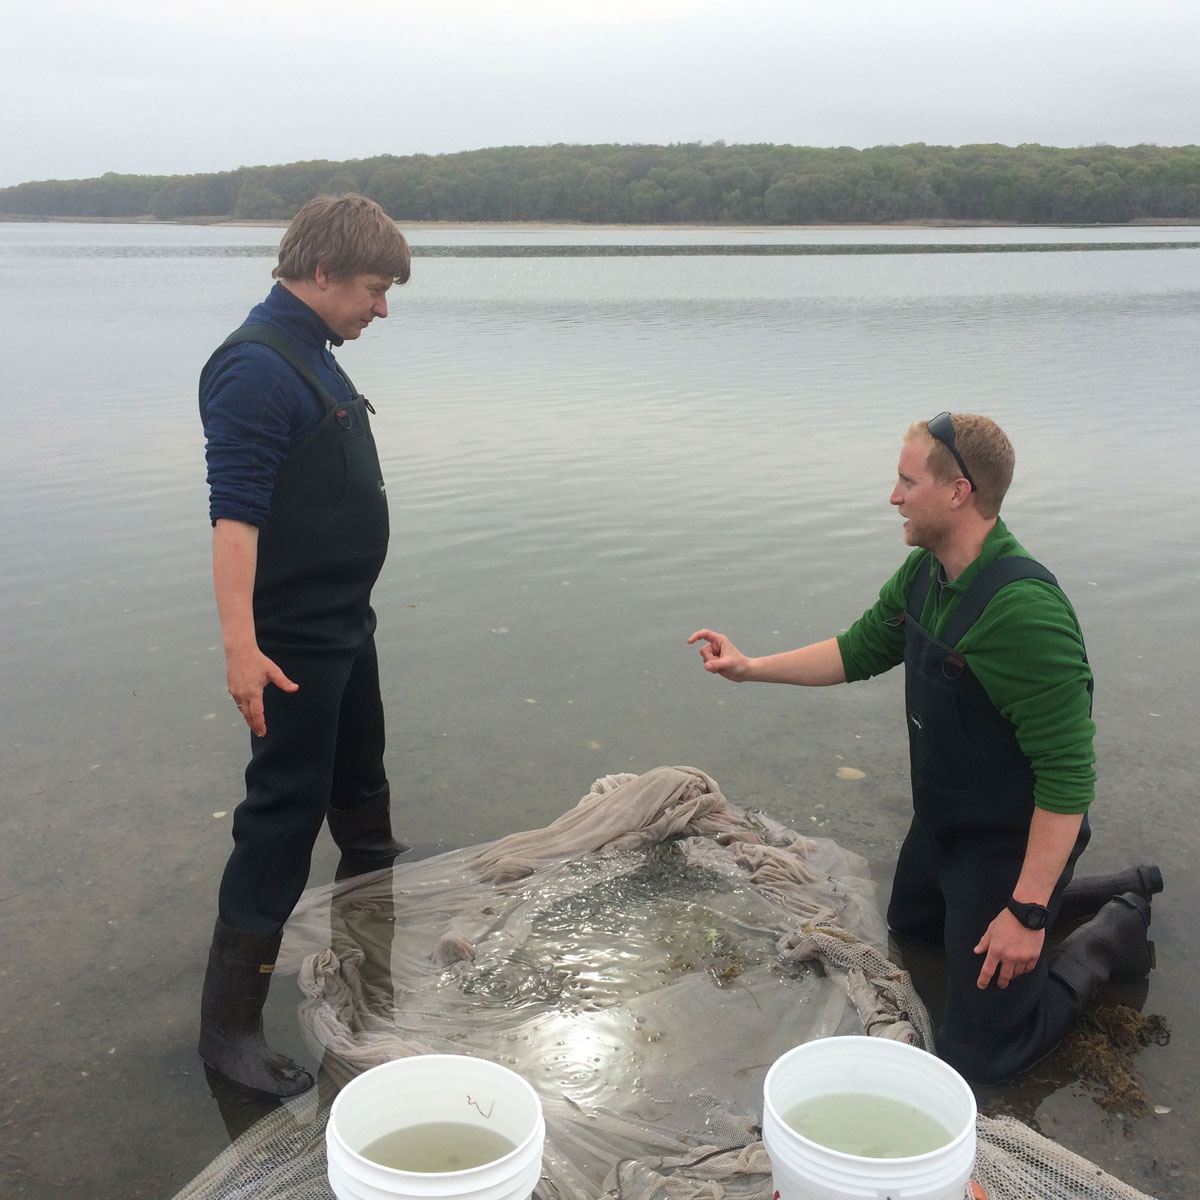 Hannes and Chris in Mumford Cove, discussing how to sort the catch of silversides collected by beach seine